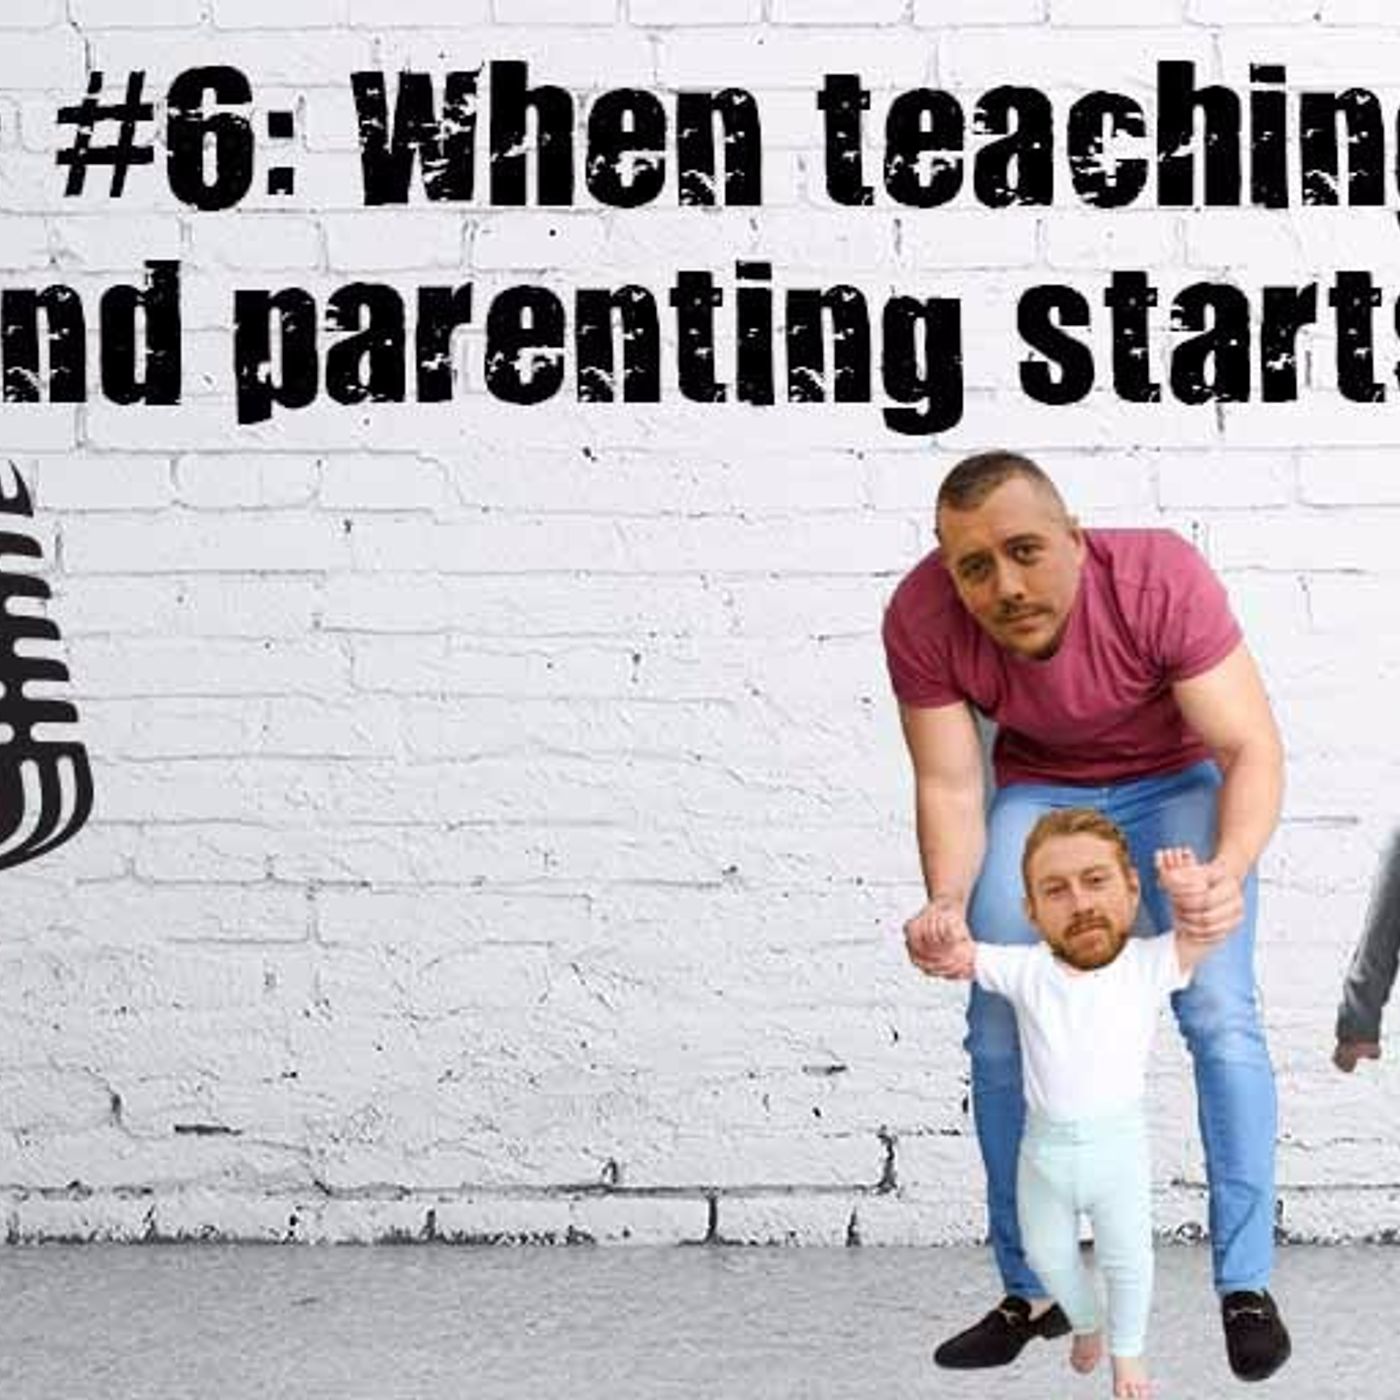 S1 Ep6: When Teaching Stops and Parenting Starts